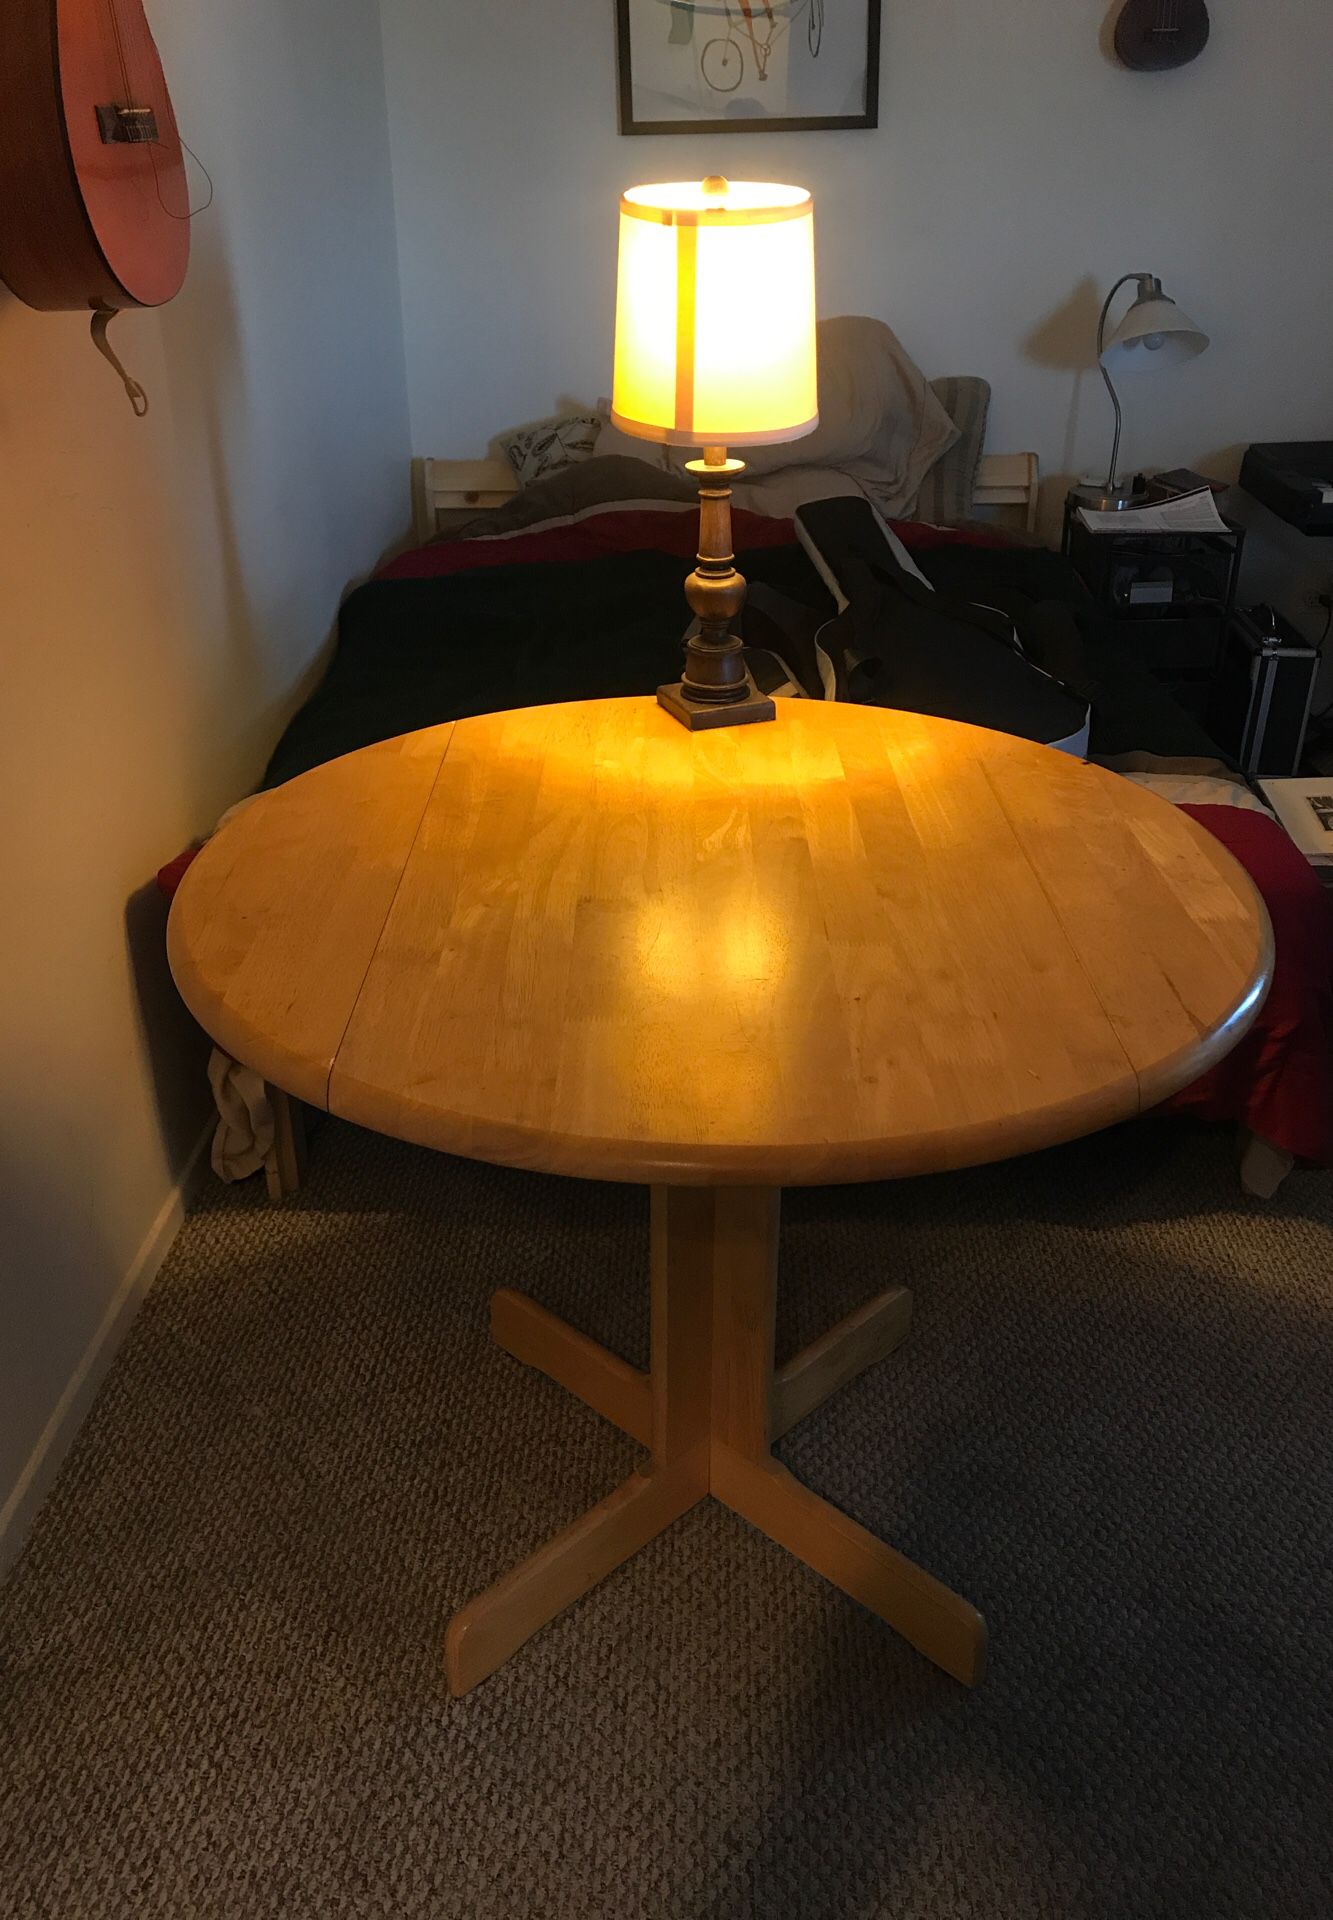 FREE! Kitchen table with folding flaps